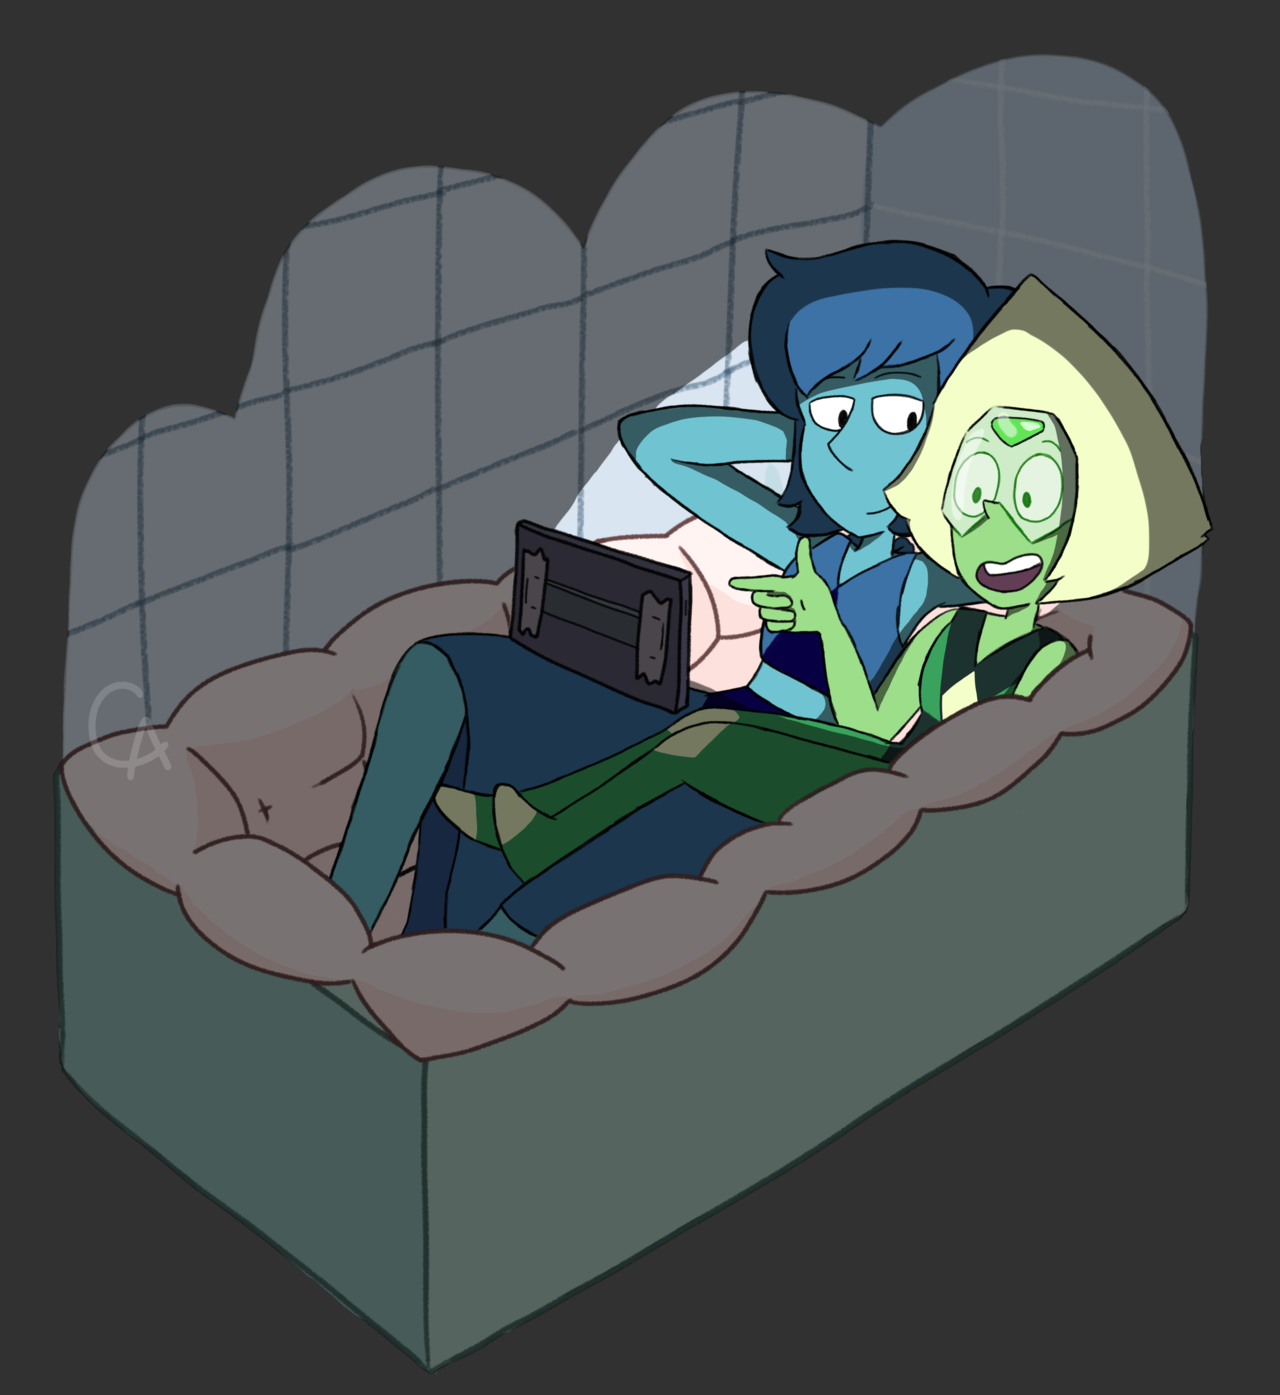 So if Lapis loses the barn in space, can they become Bath Mates? Two bros, chillin’ in a bathtub, 5cm apart cause they’re so gay